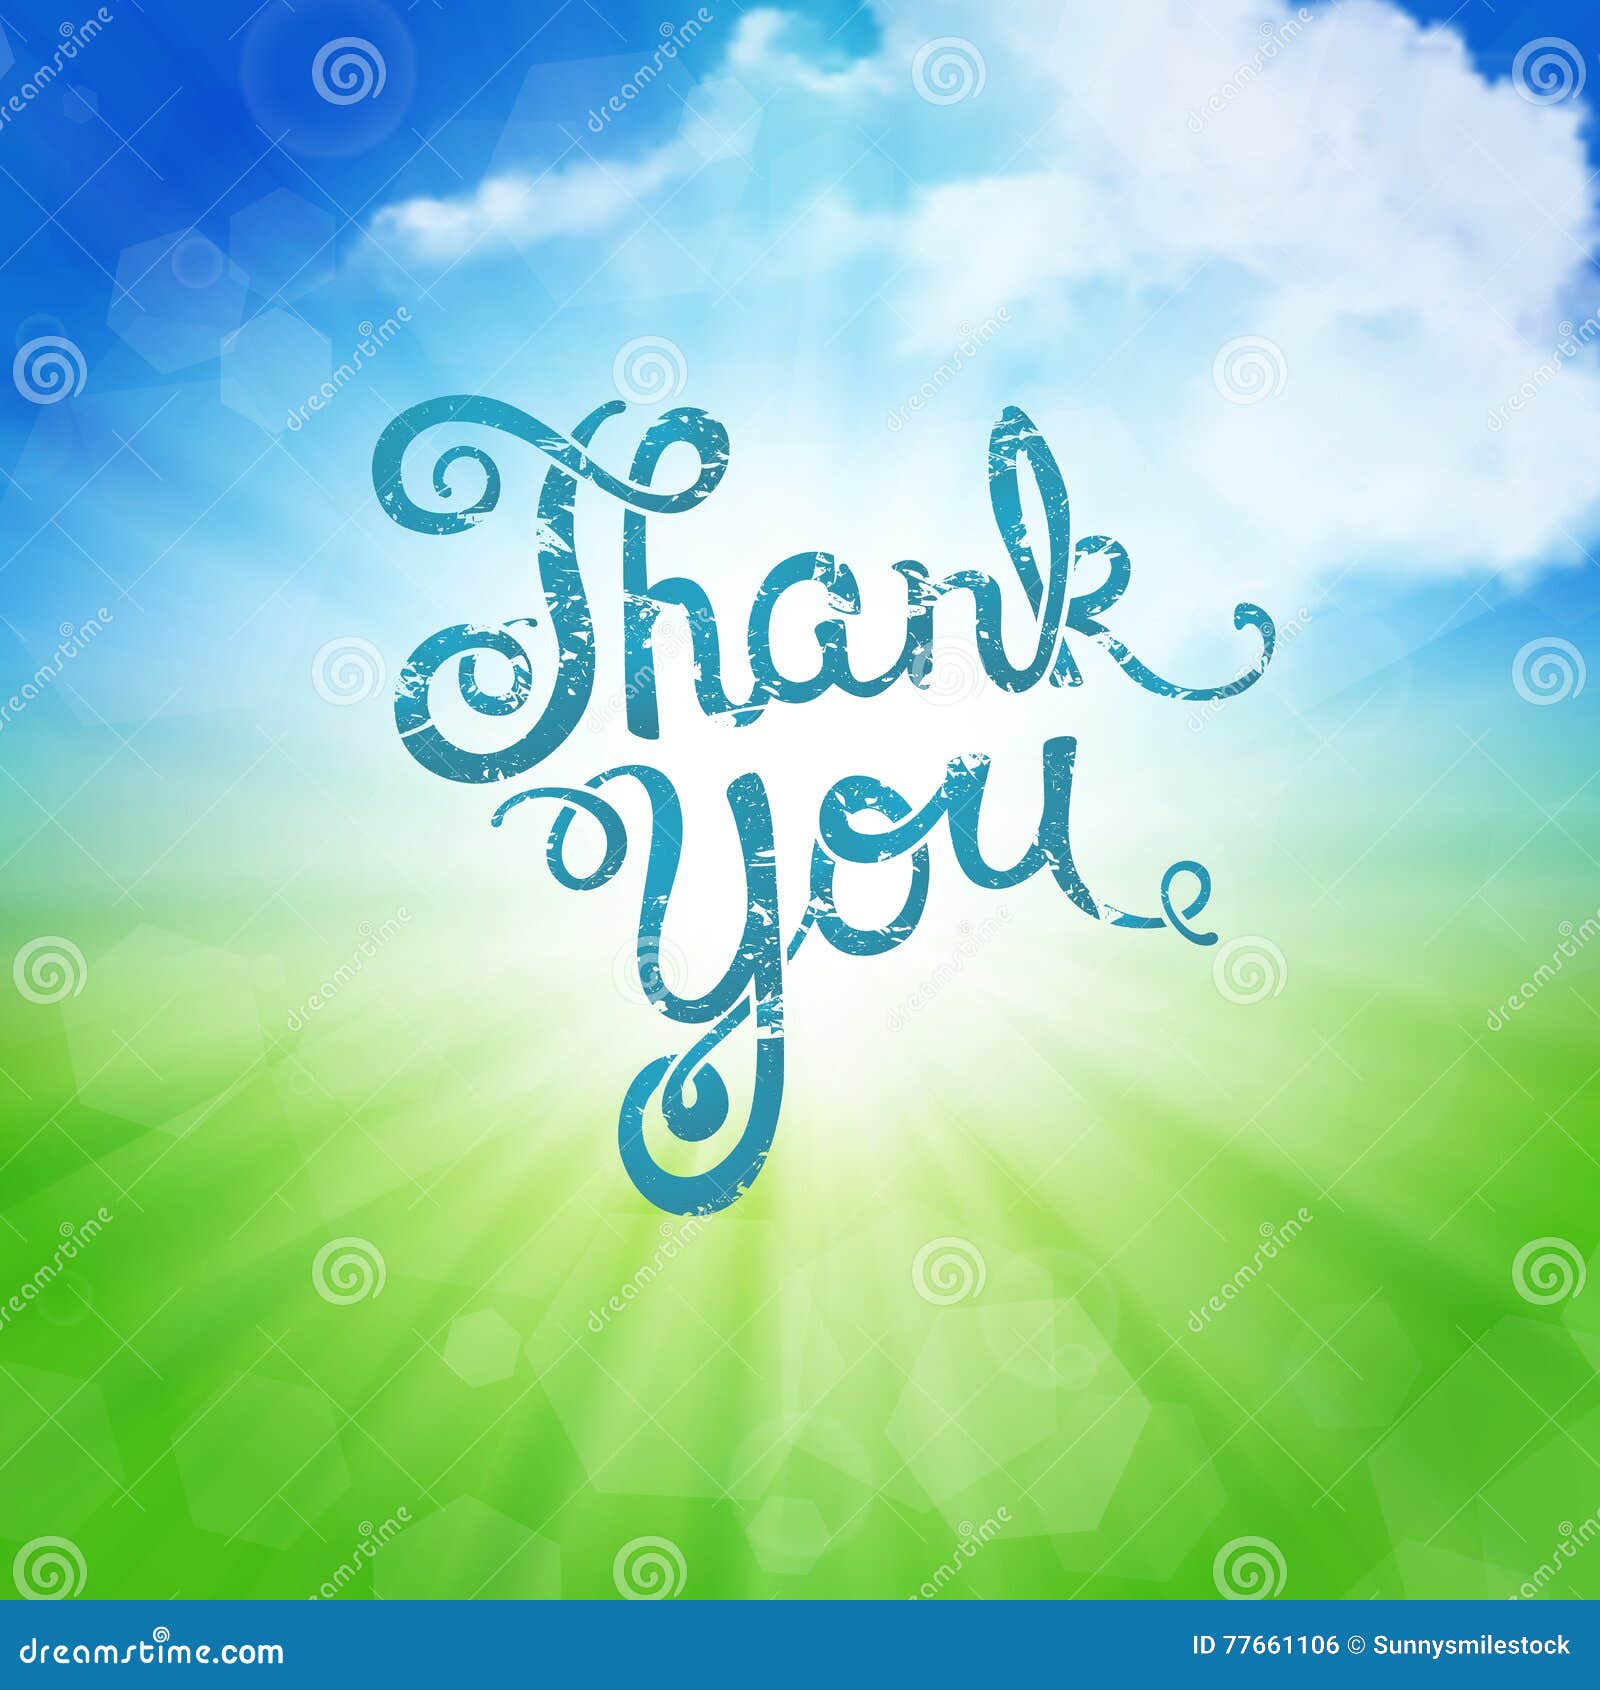 thank-you-poster-stock-vector-illustration-of-note-retro-77661106